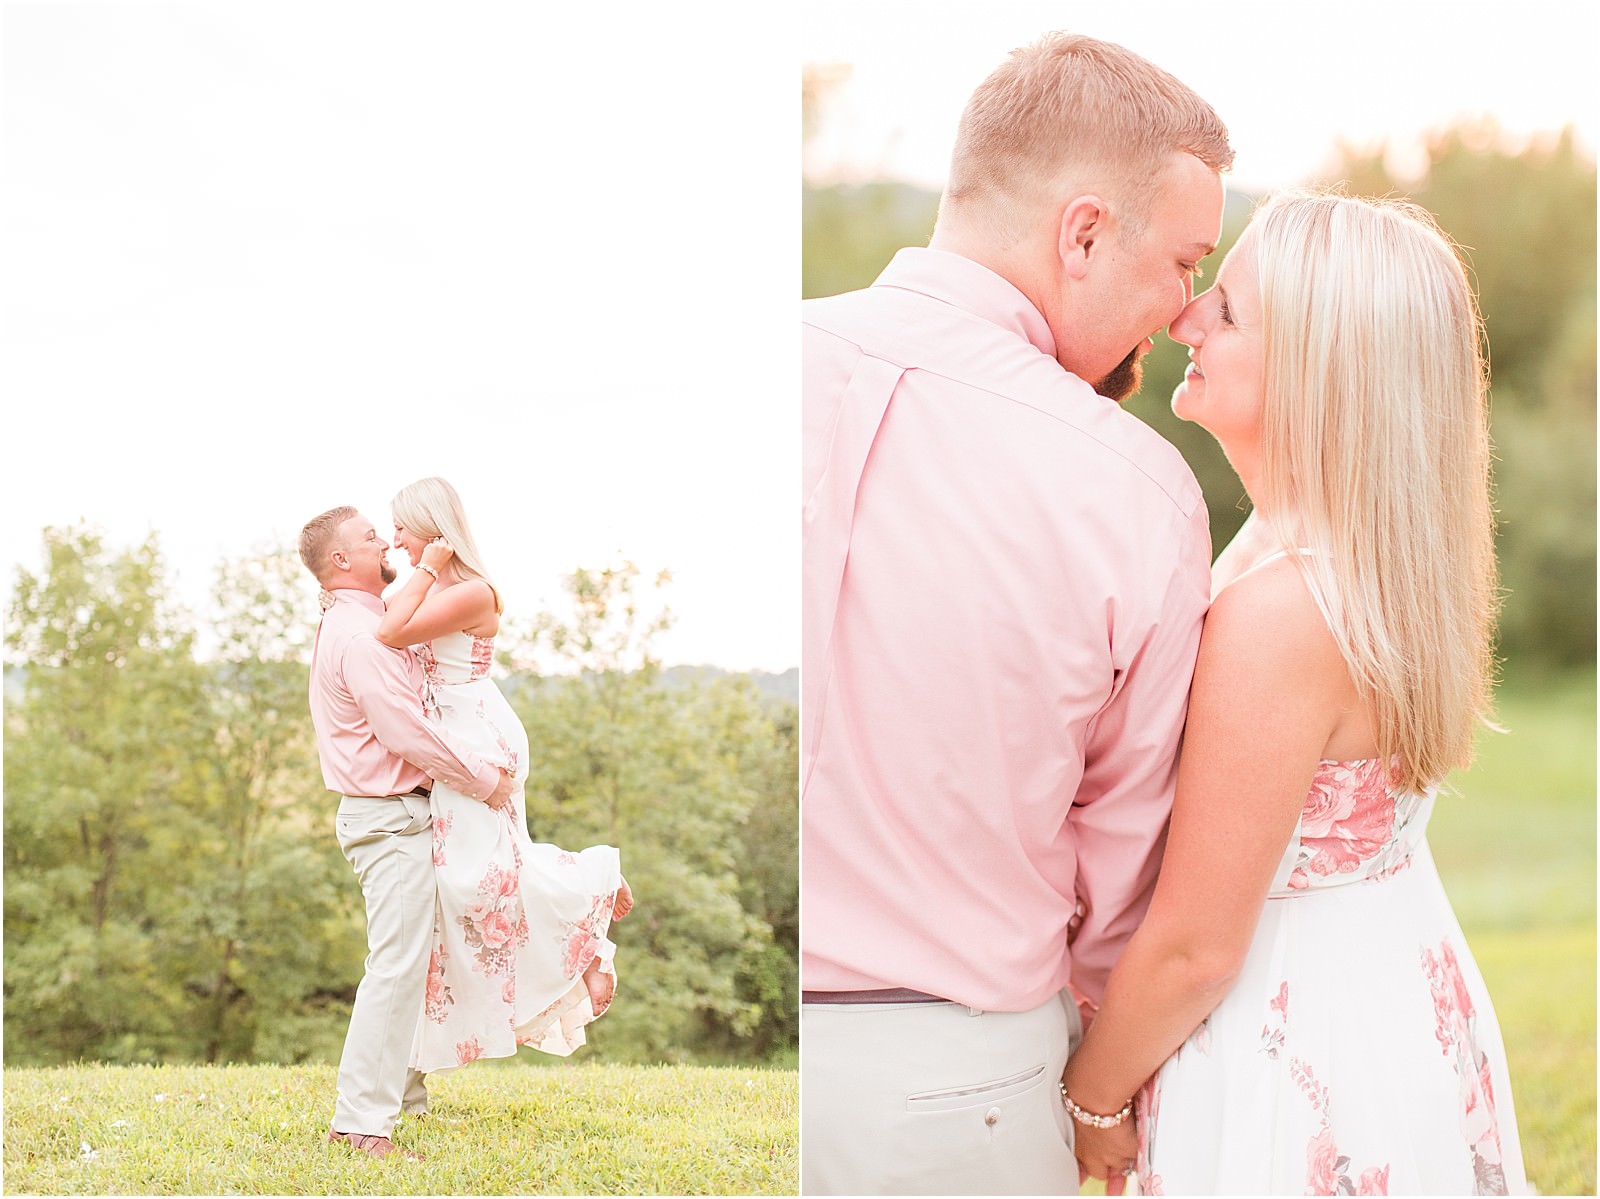 Lauren and Bryce | The Corner House B&ed and Breakfast Engagement Session | Bret and Brandie Photography 025.jpg